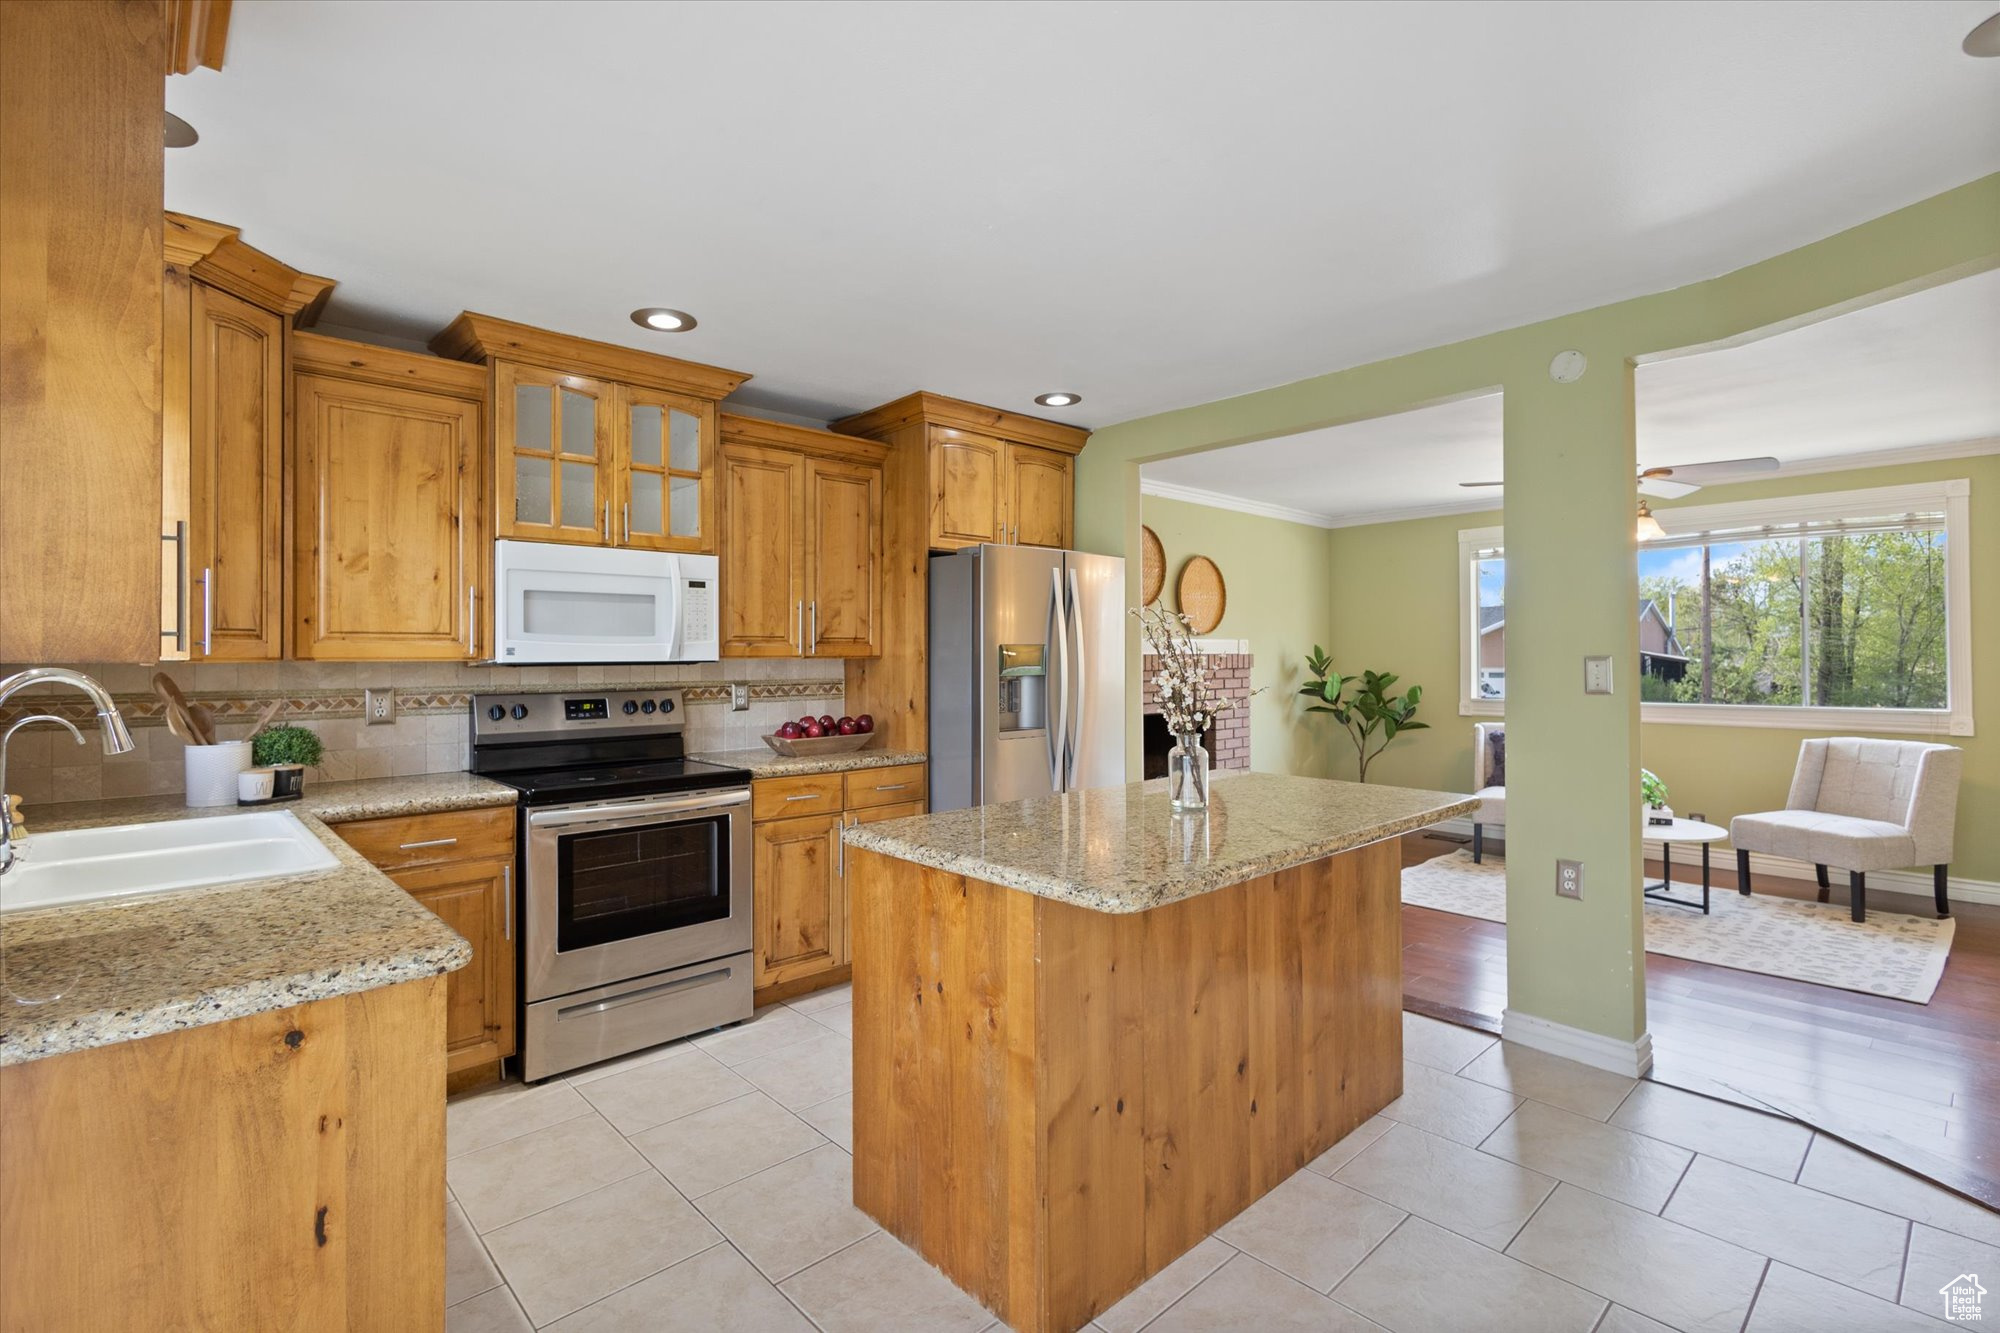 Kitchen with sink, appliances with stainless steel finishes, backsplash, and light tile floors